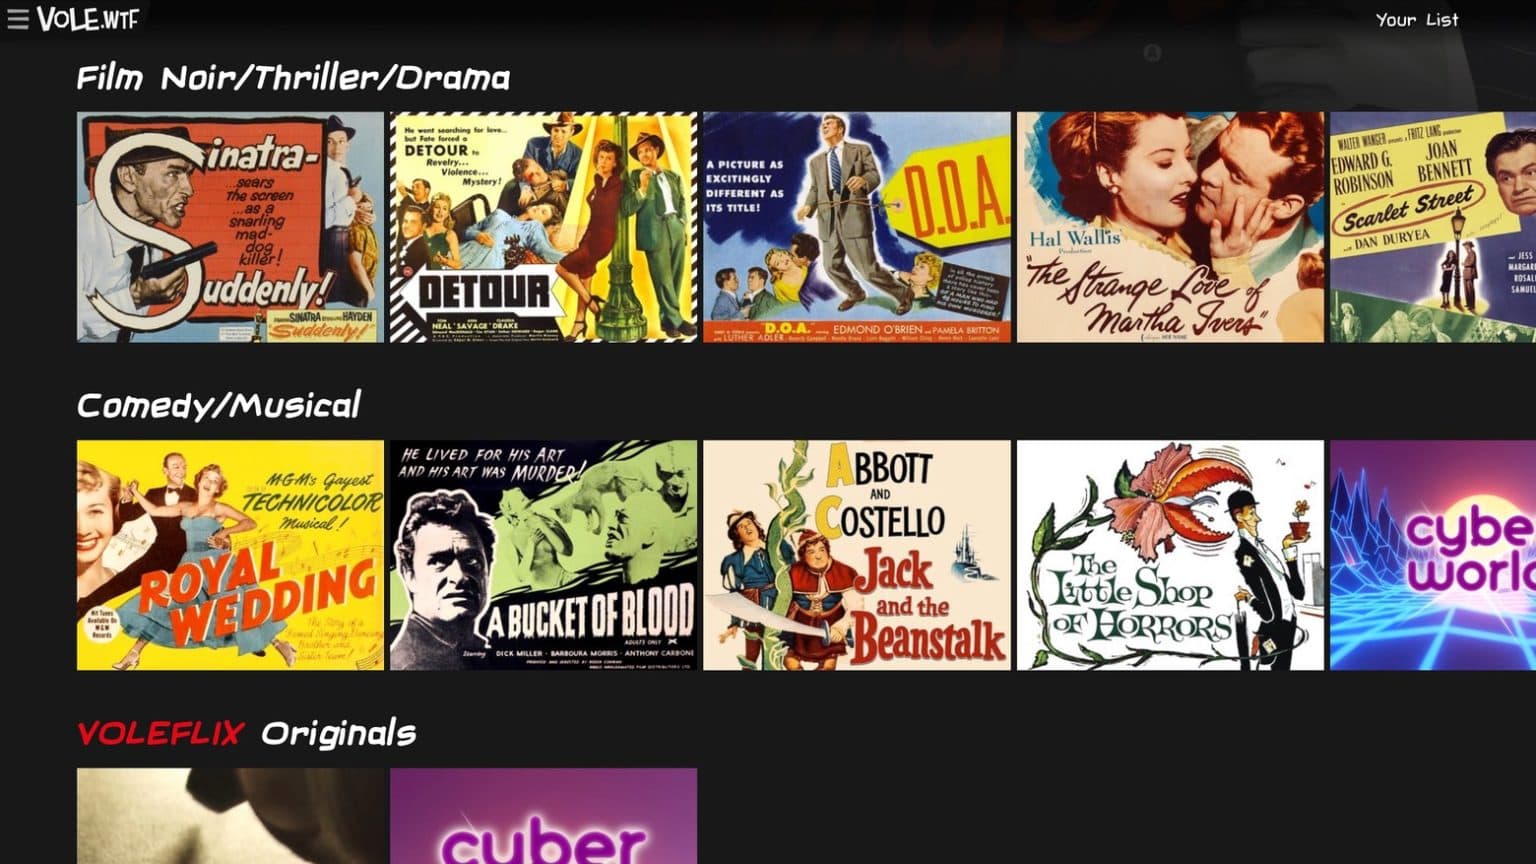 Everything on Voleflix is public domain and free.